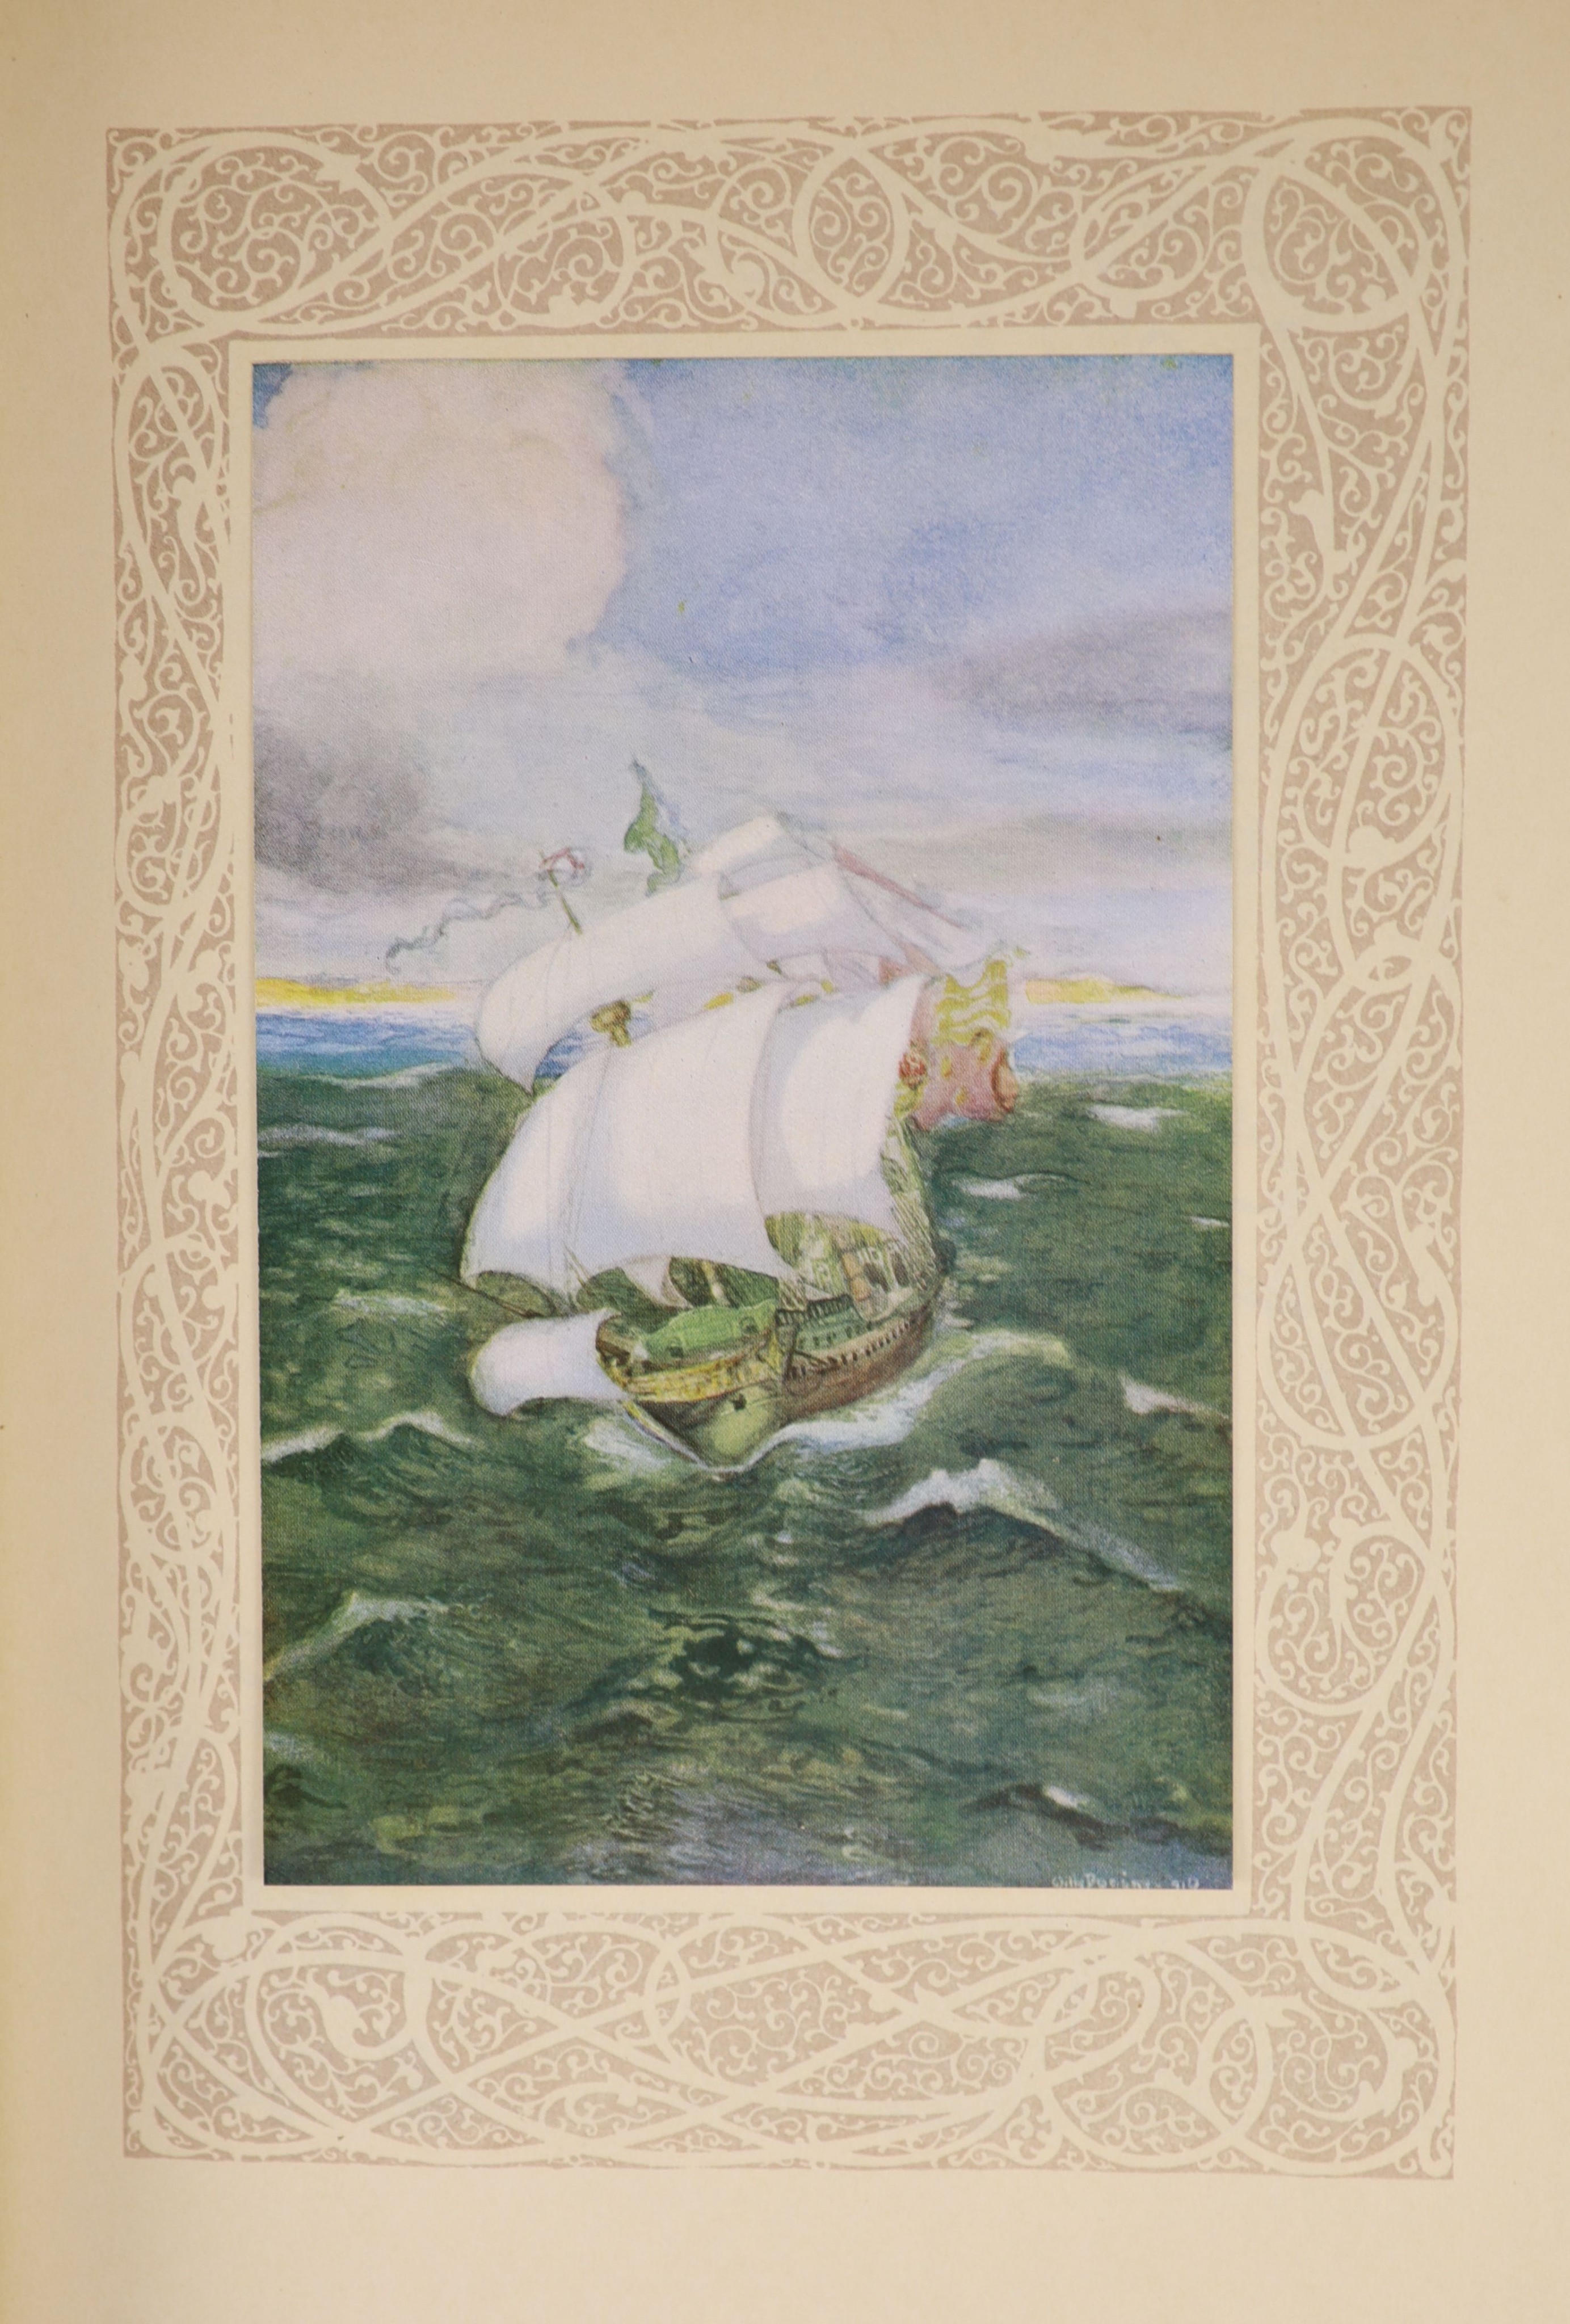 Coleridge, Samuel Taylor - The Rime of the Ancient Mariner, one of 525, illustrated by Willy Pogany, folio, morocco gilt, with 20 tipped-in colour plates, George Harrap, London, 1910; West, Michael Philip - Claire de Lun